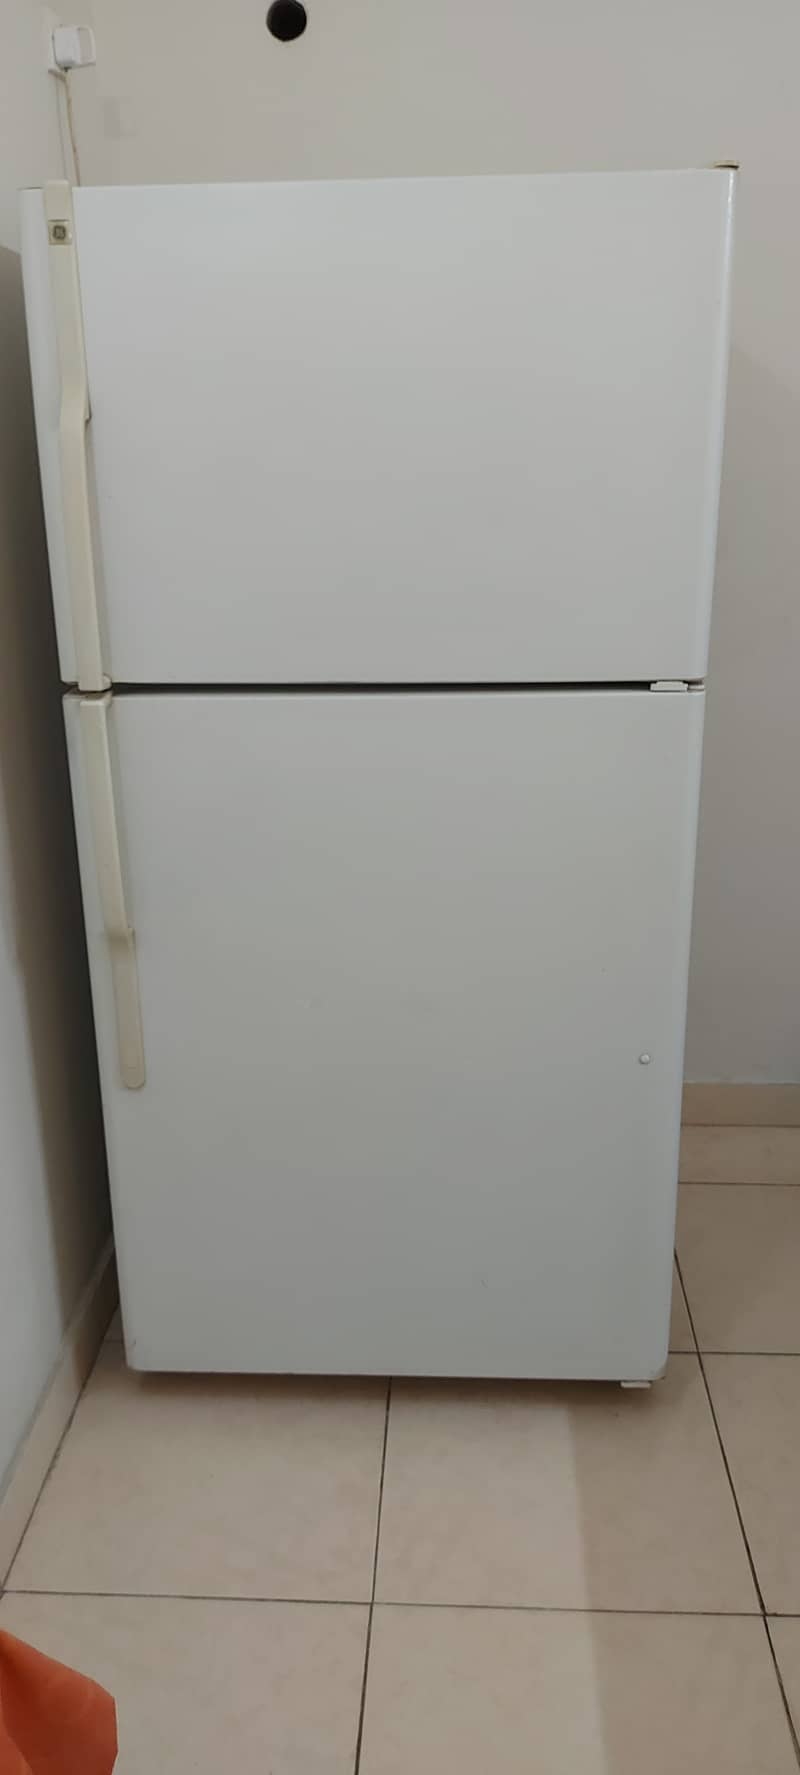 GE Refrigerator Made in Mexico Huge size 615 ltr capacity 22 cu ft 7